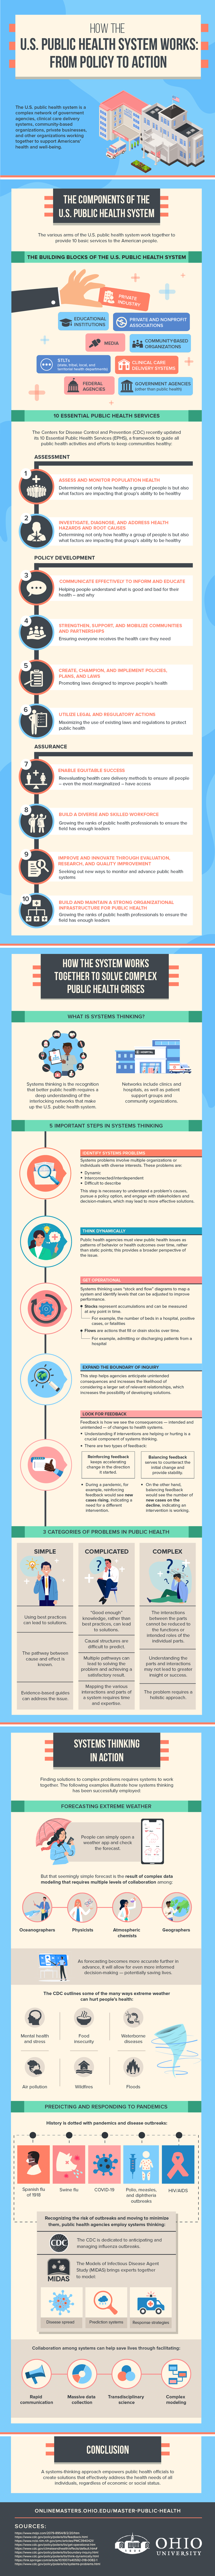 How To Create An Infographic On Bioethics